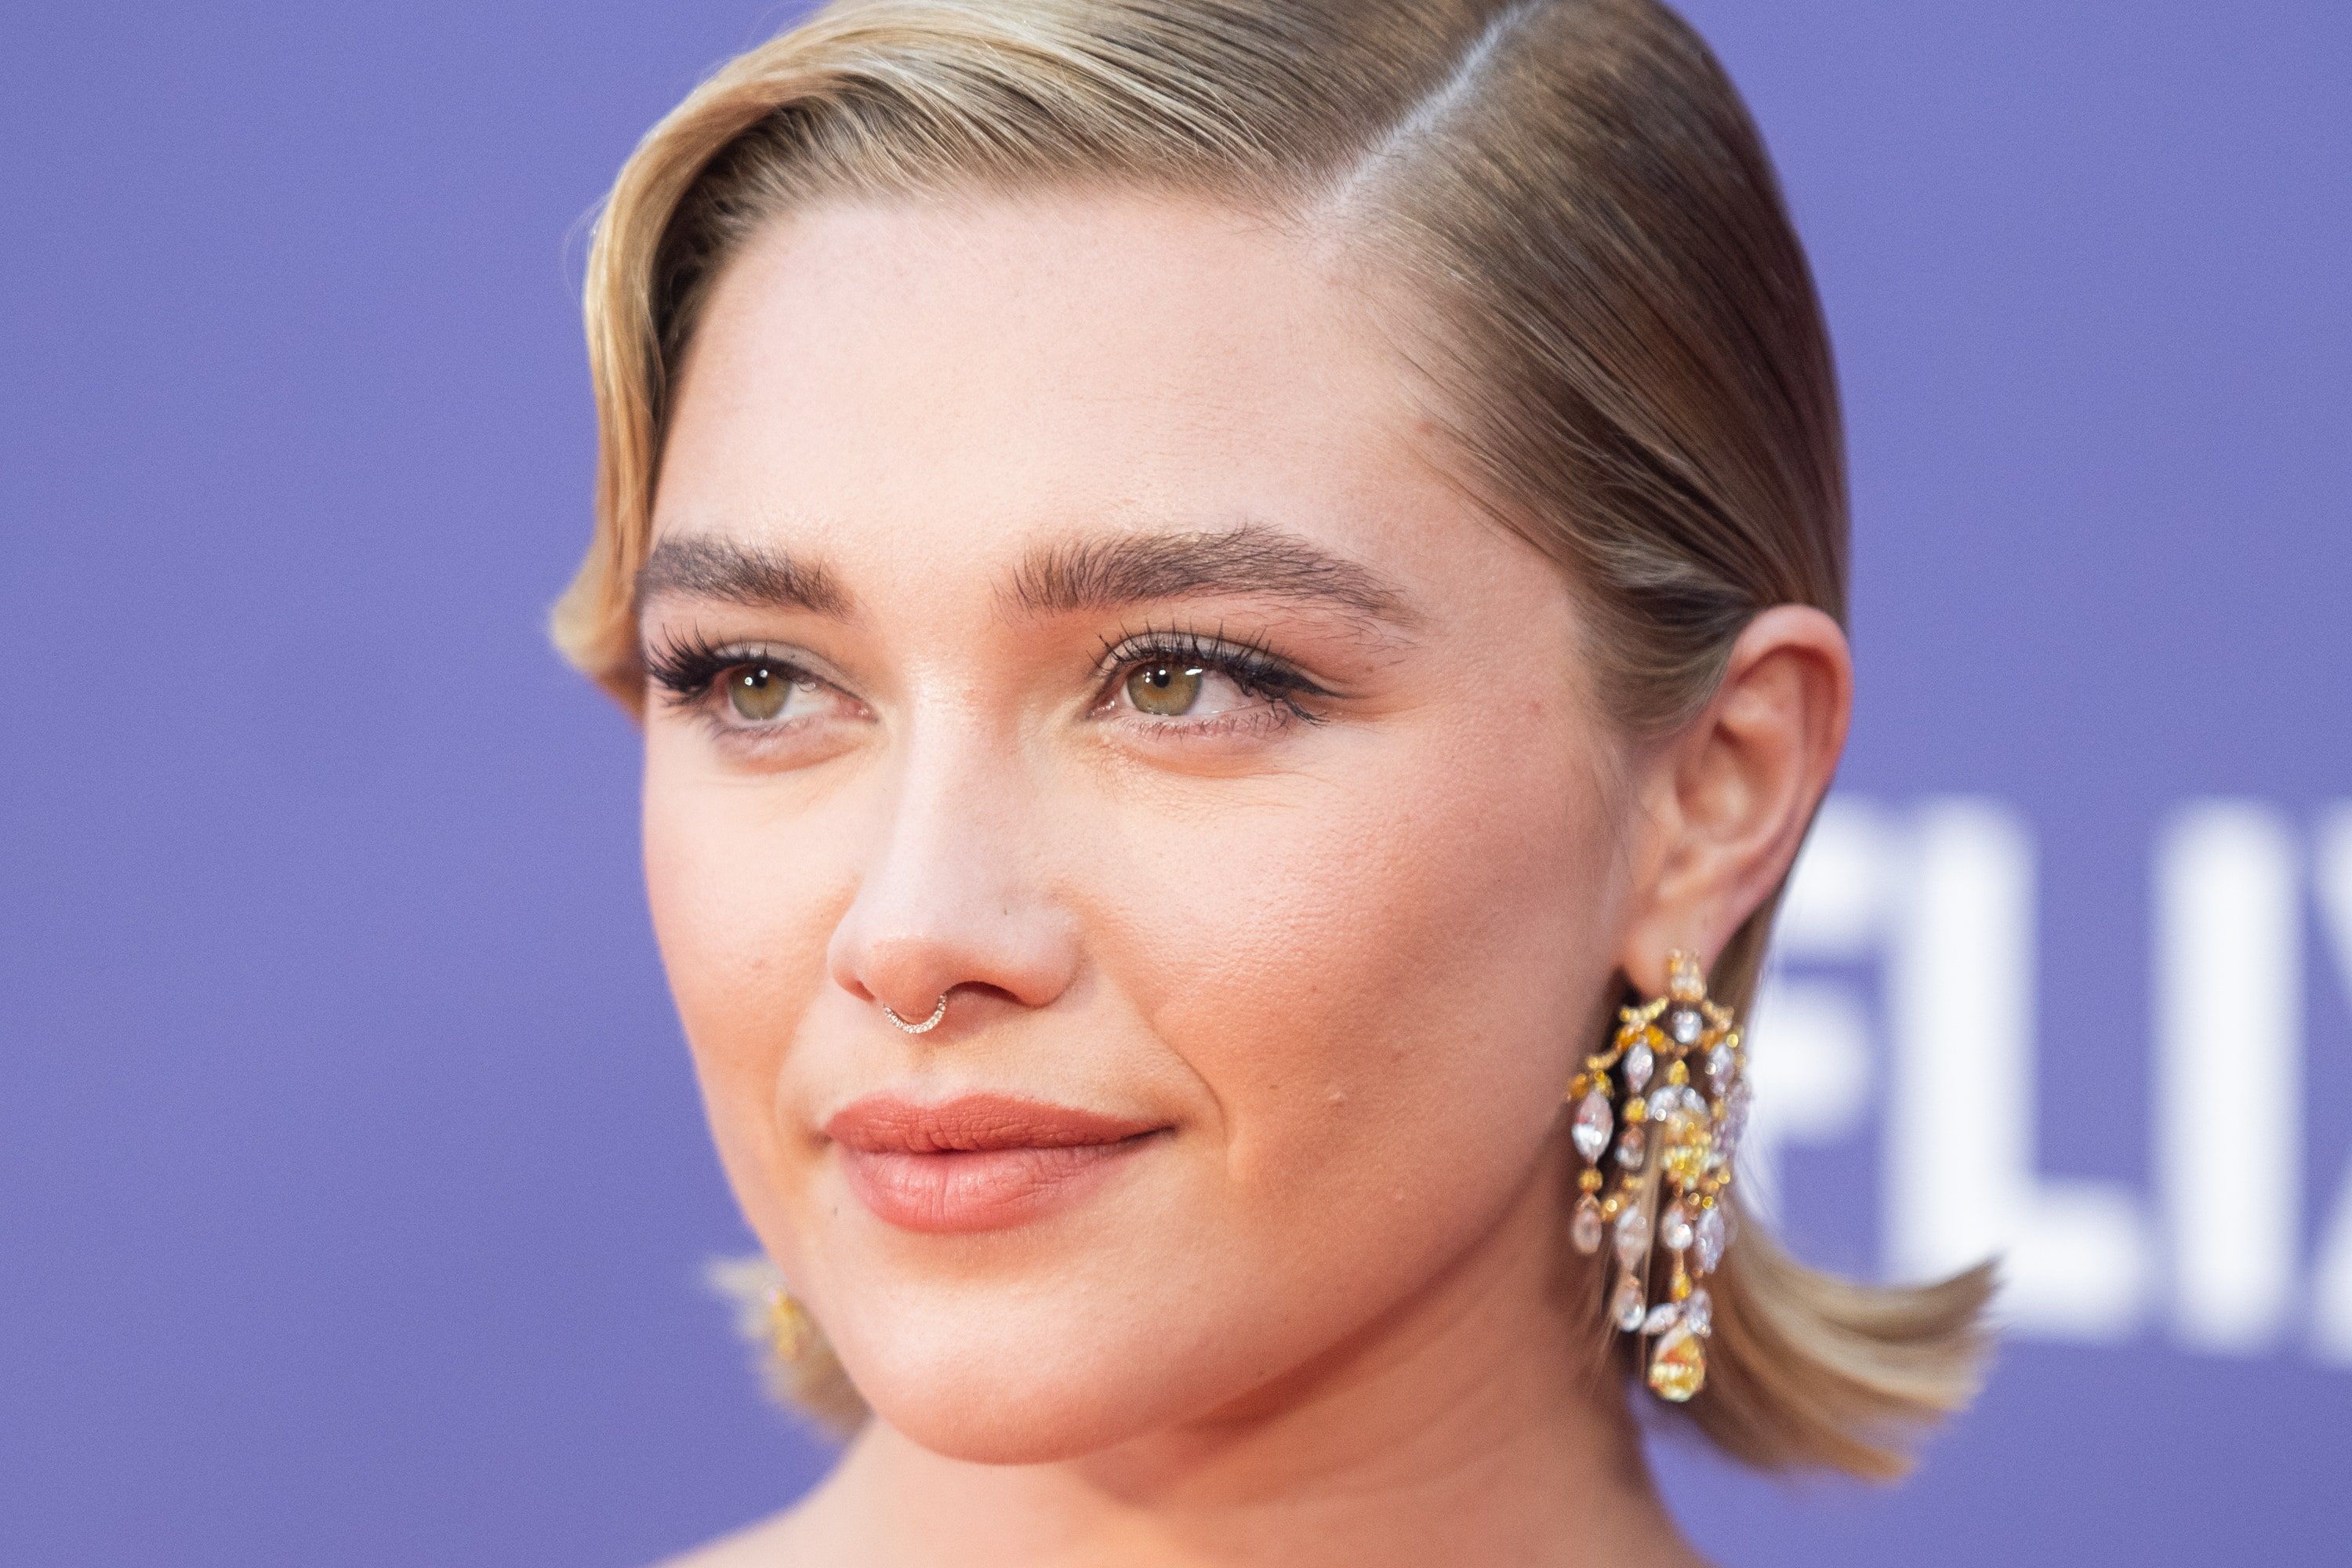 Florence Pugh Went Full '60s Mod In Mismatched Monochrome Outfit And Go Go Boots